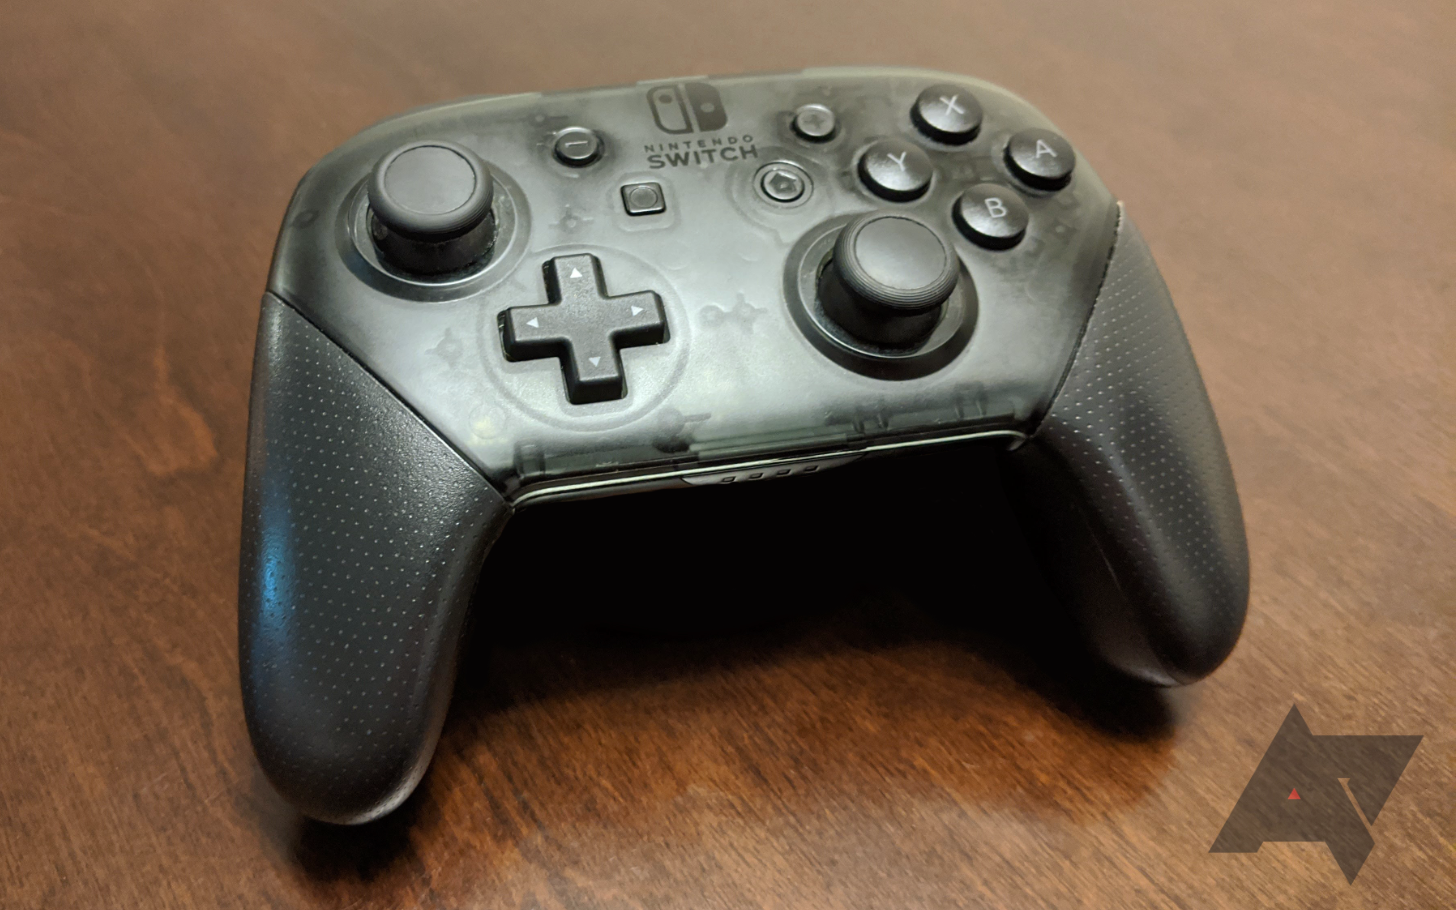 https://static1.anpoimages.com/wordpress/wp-content/uploads/2020/07/16/Nintendo-Switch-Pro-Controller-2.png